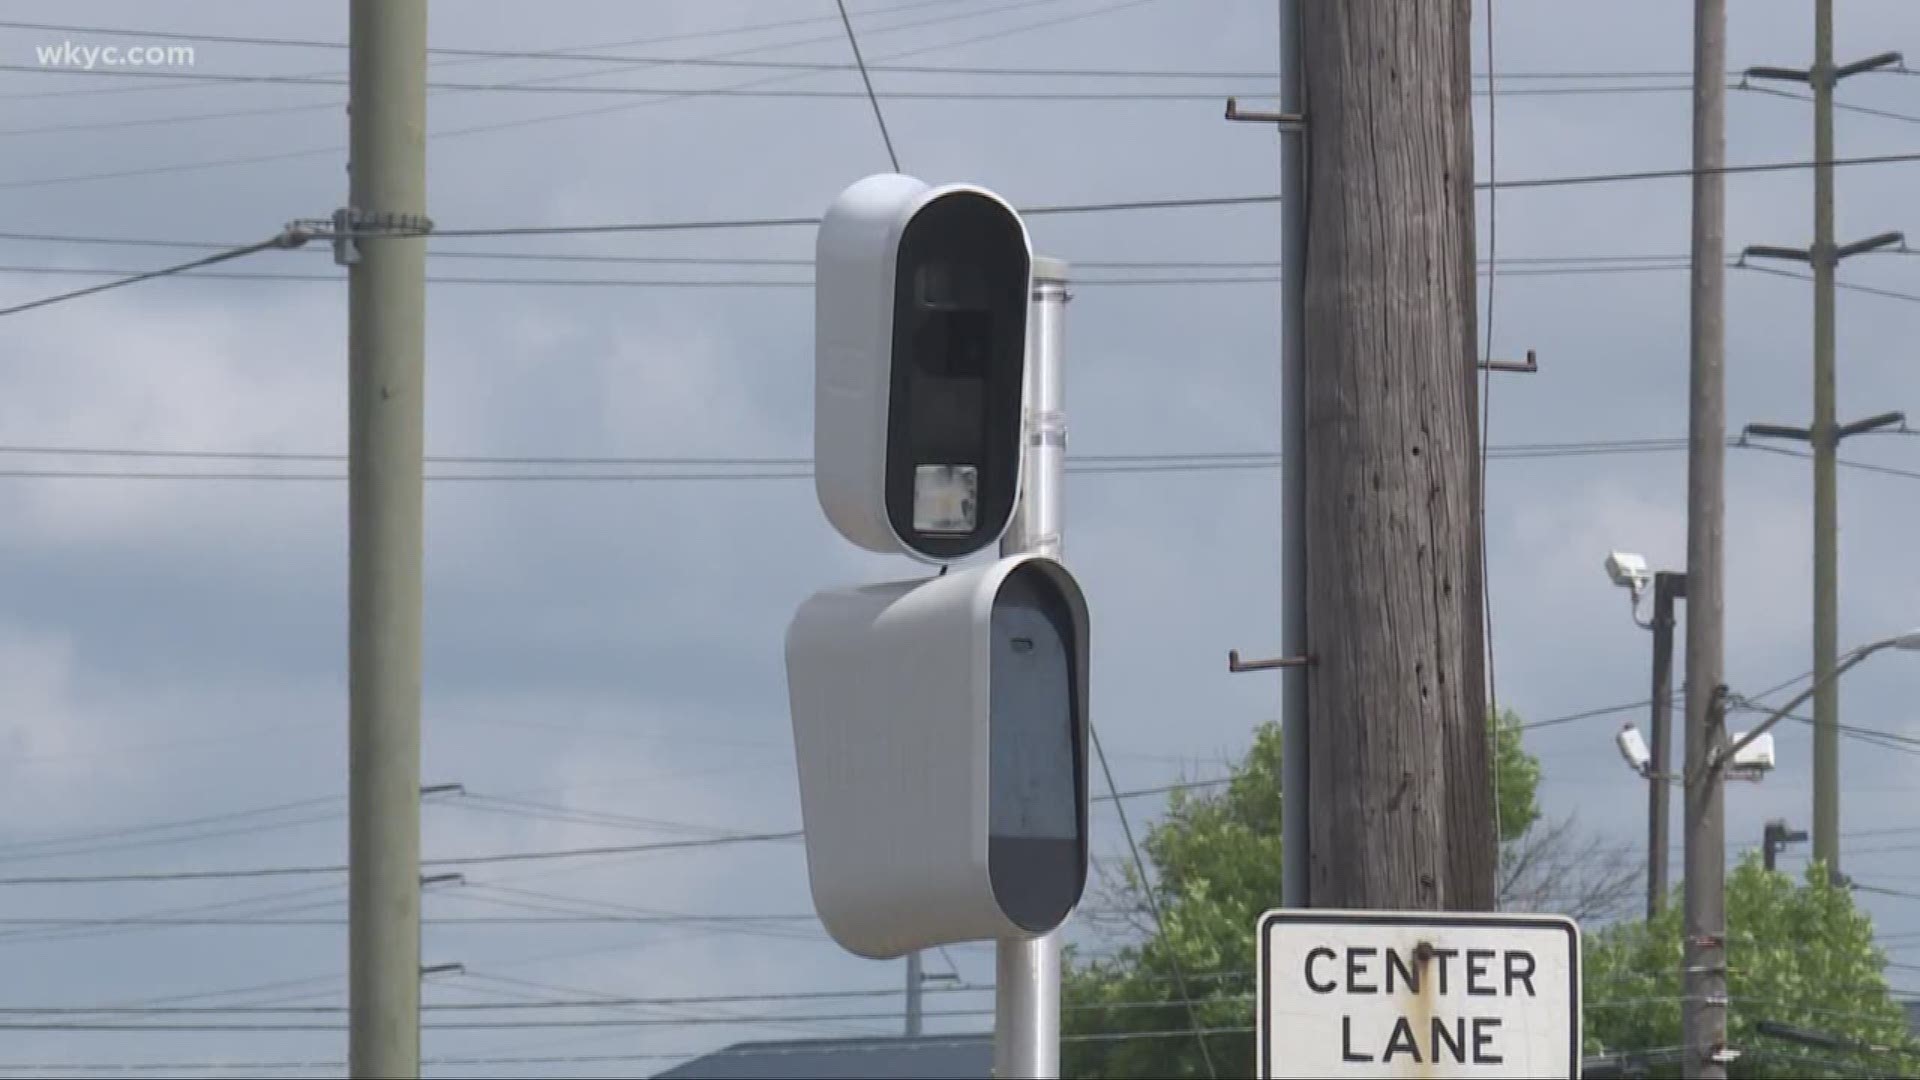 A new law signed by Gov. Mike DeWine takes away funding from localities who continue to use such cameras. Brandon Simmons reports.